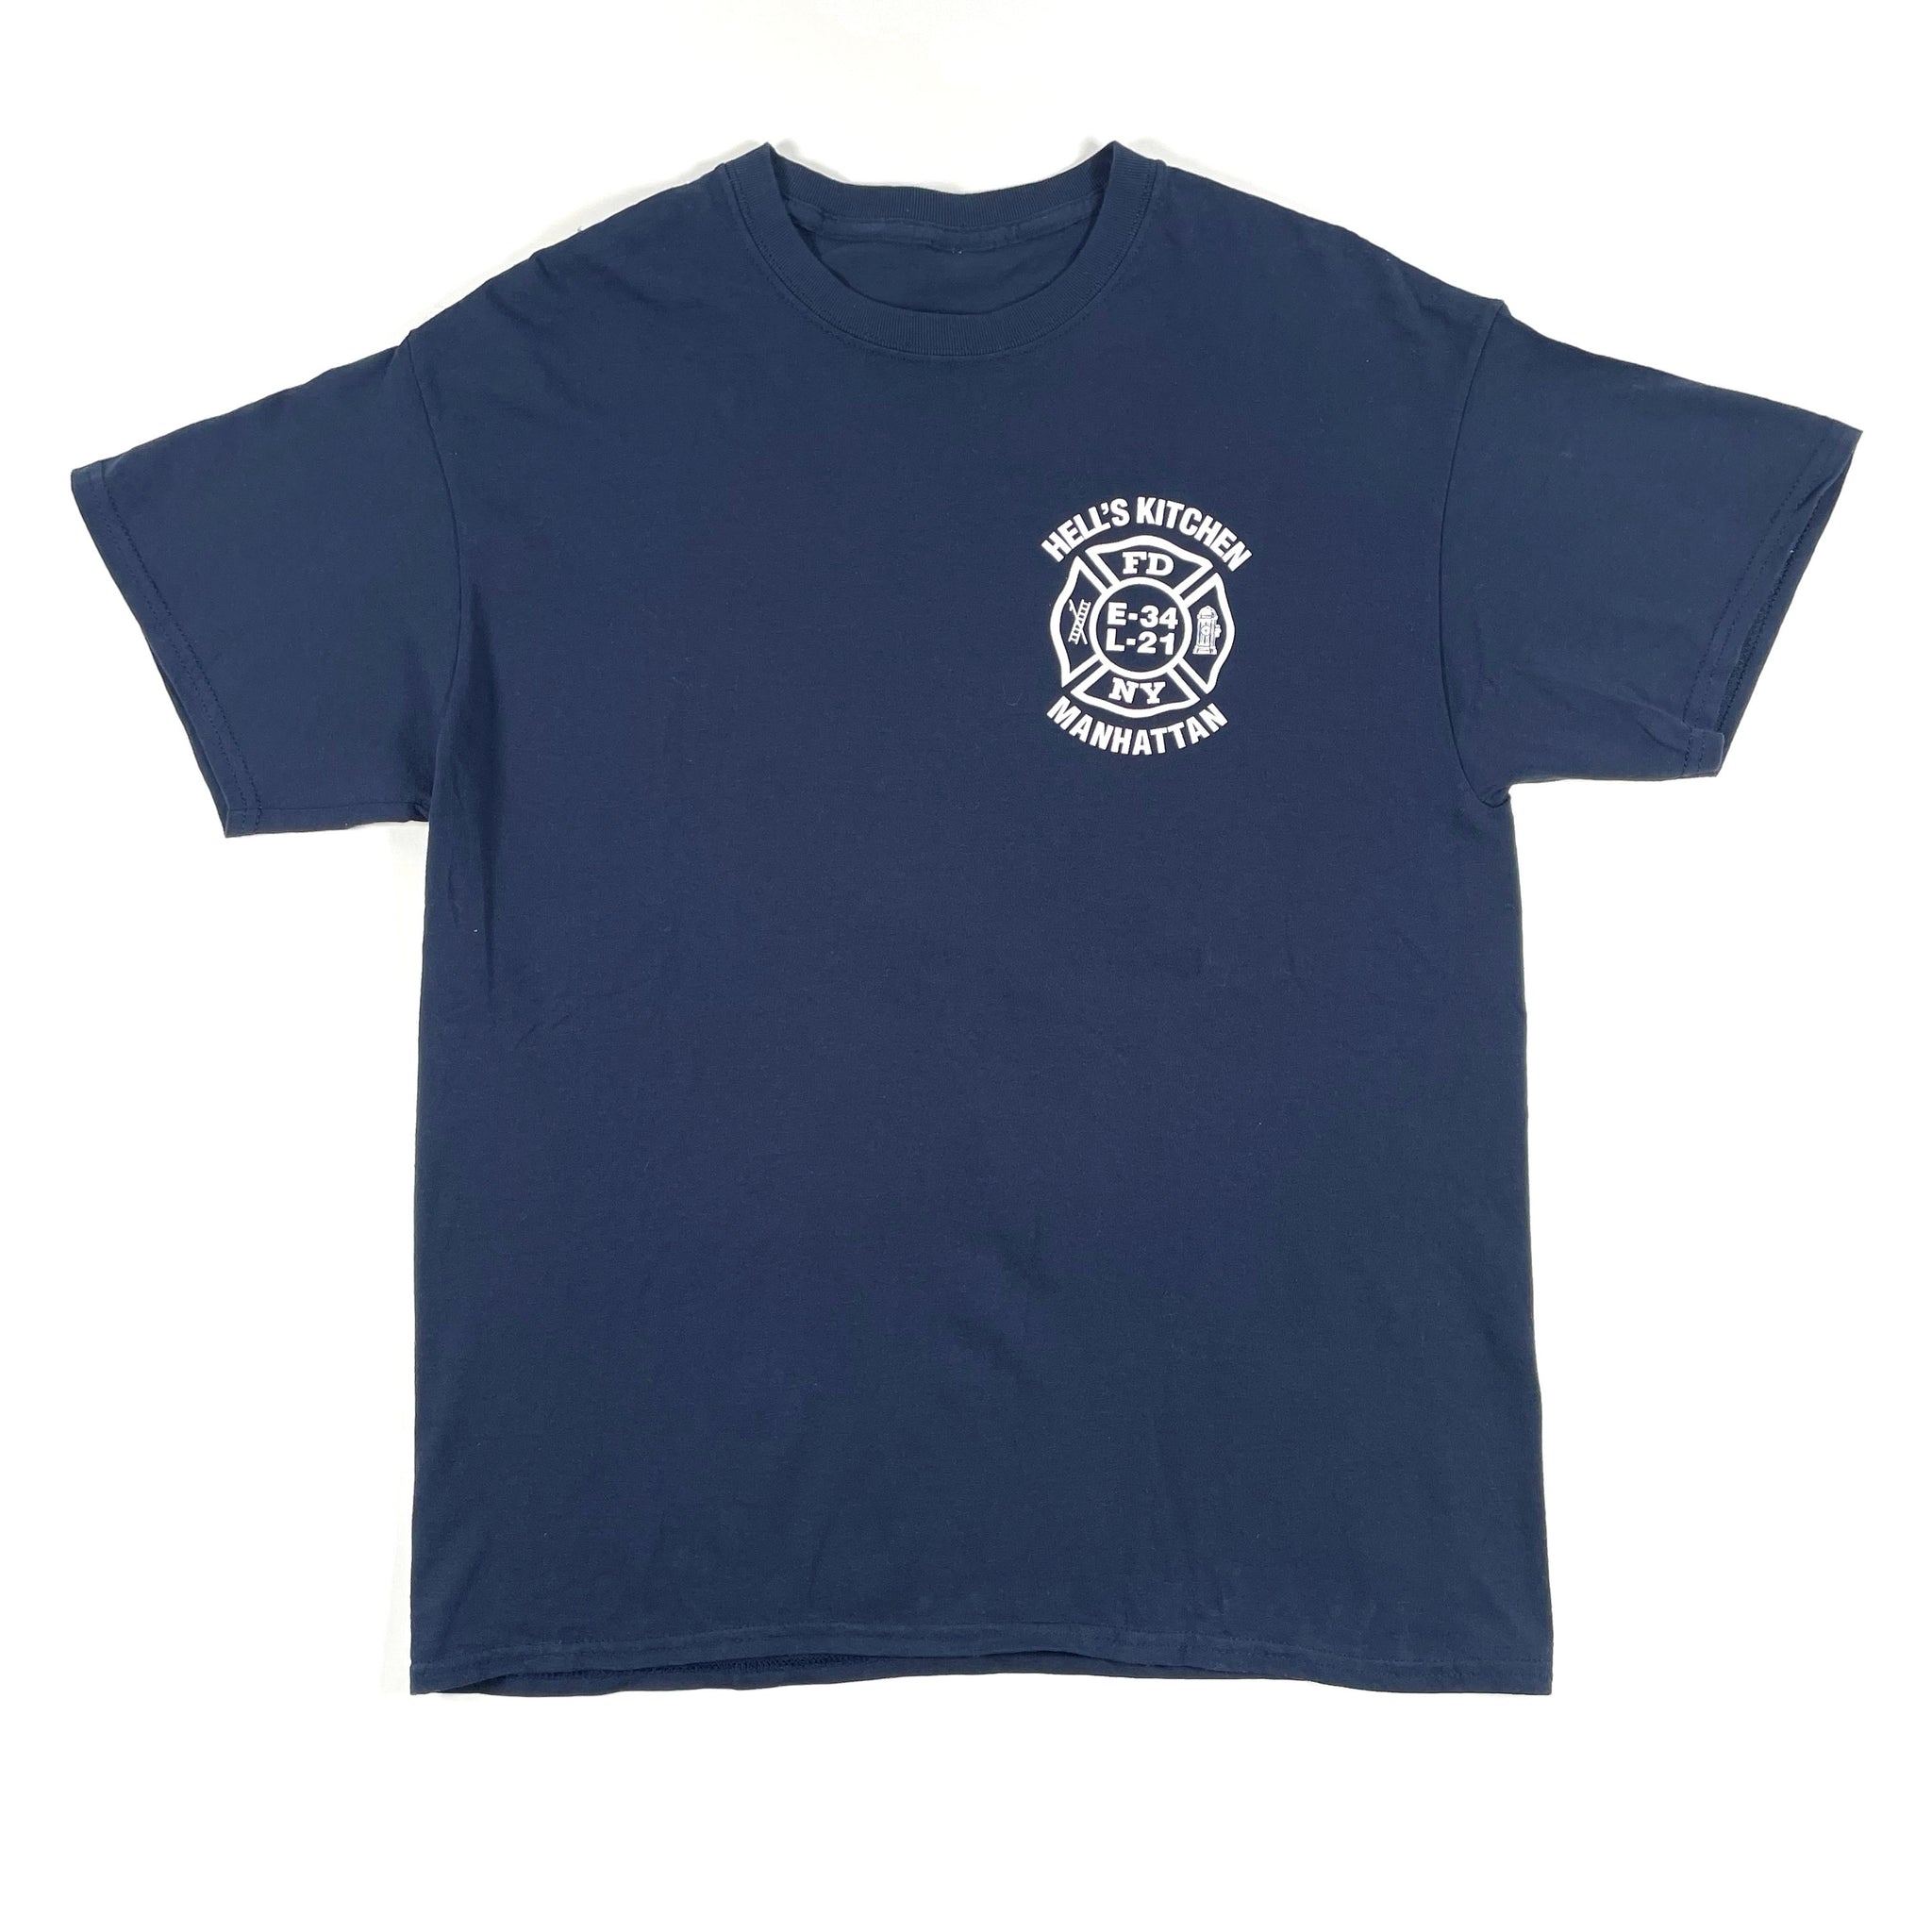 Fdny E-34 L-21 Hell's Kitchen House T-Shirt (Size: S)